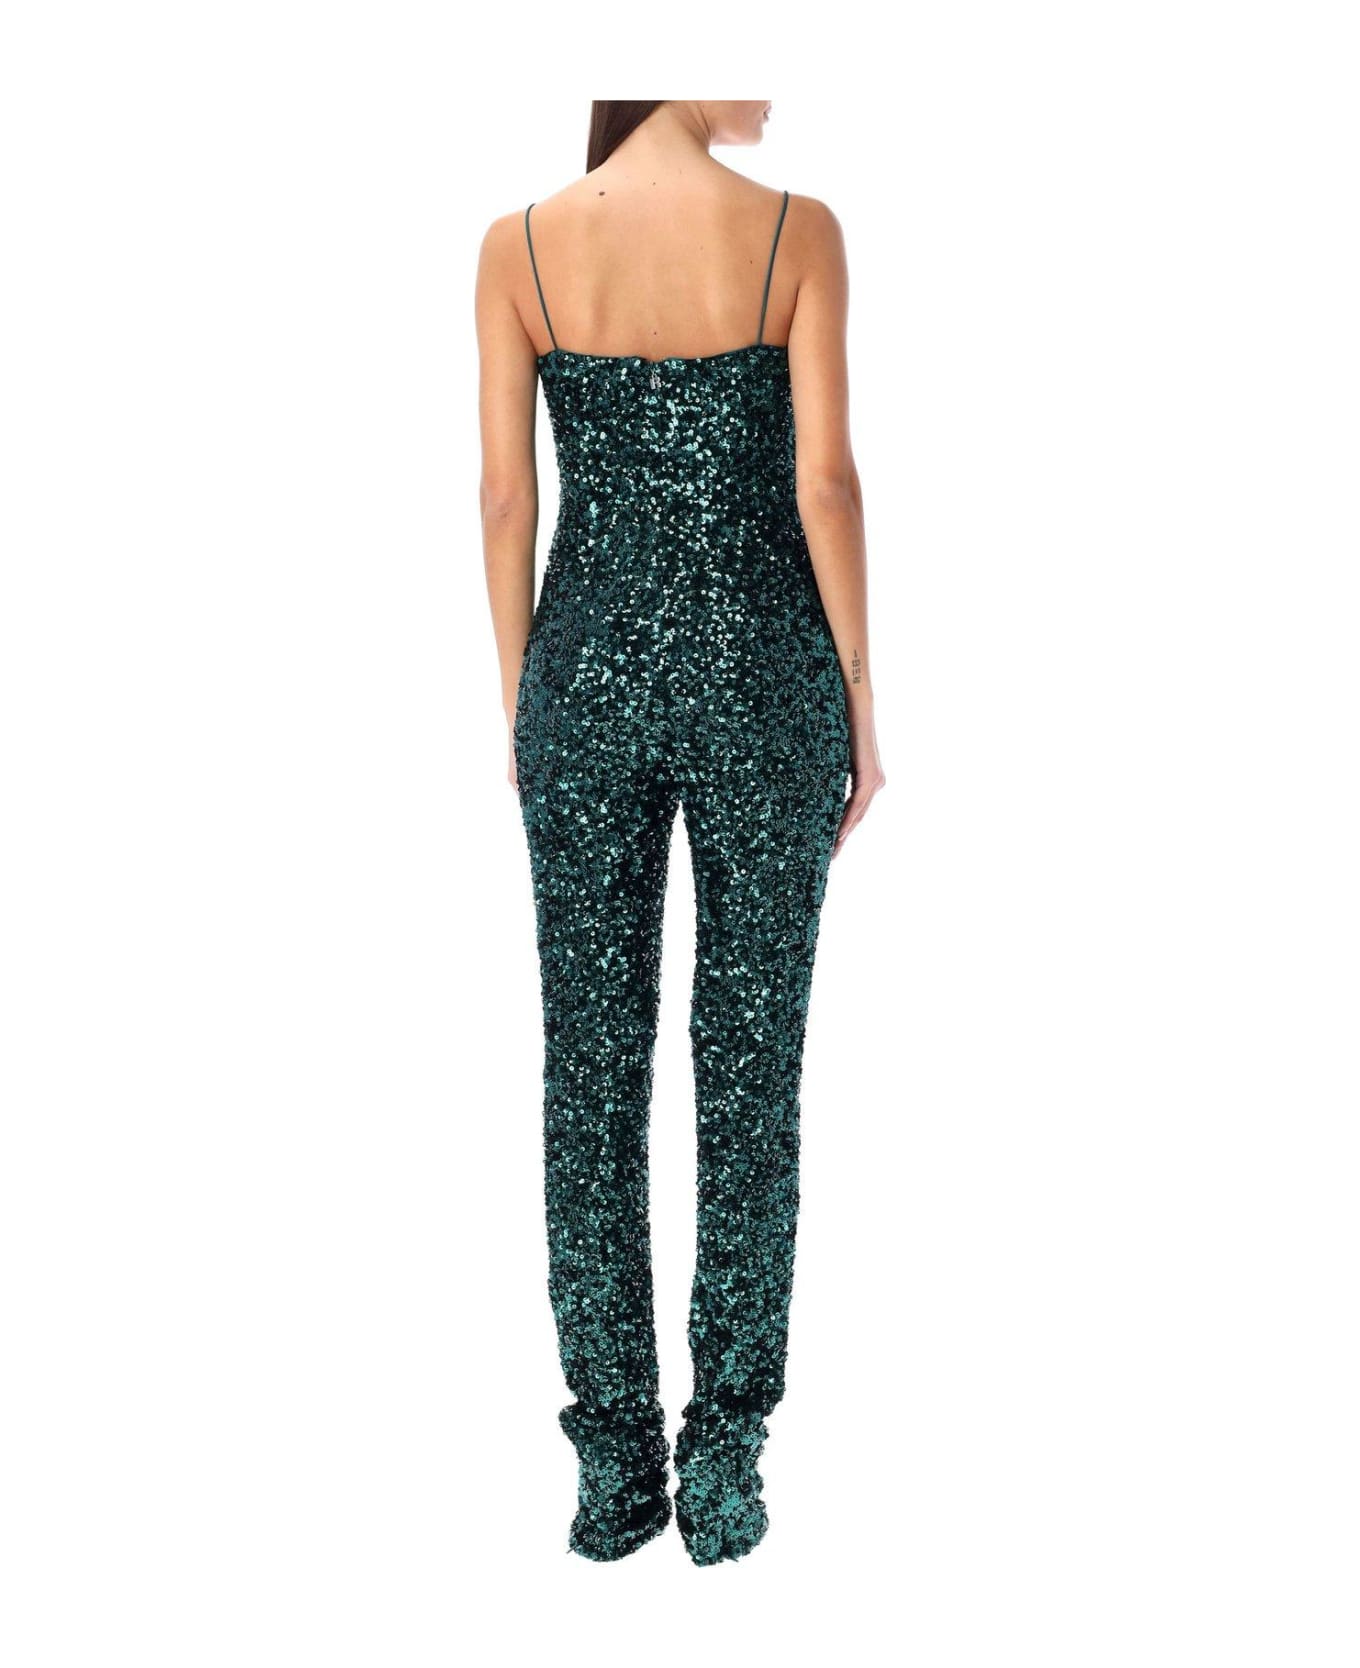 Rotate by Birger Christensen Sequin Embellished Spaghetti Straps Jumpsuit - Green